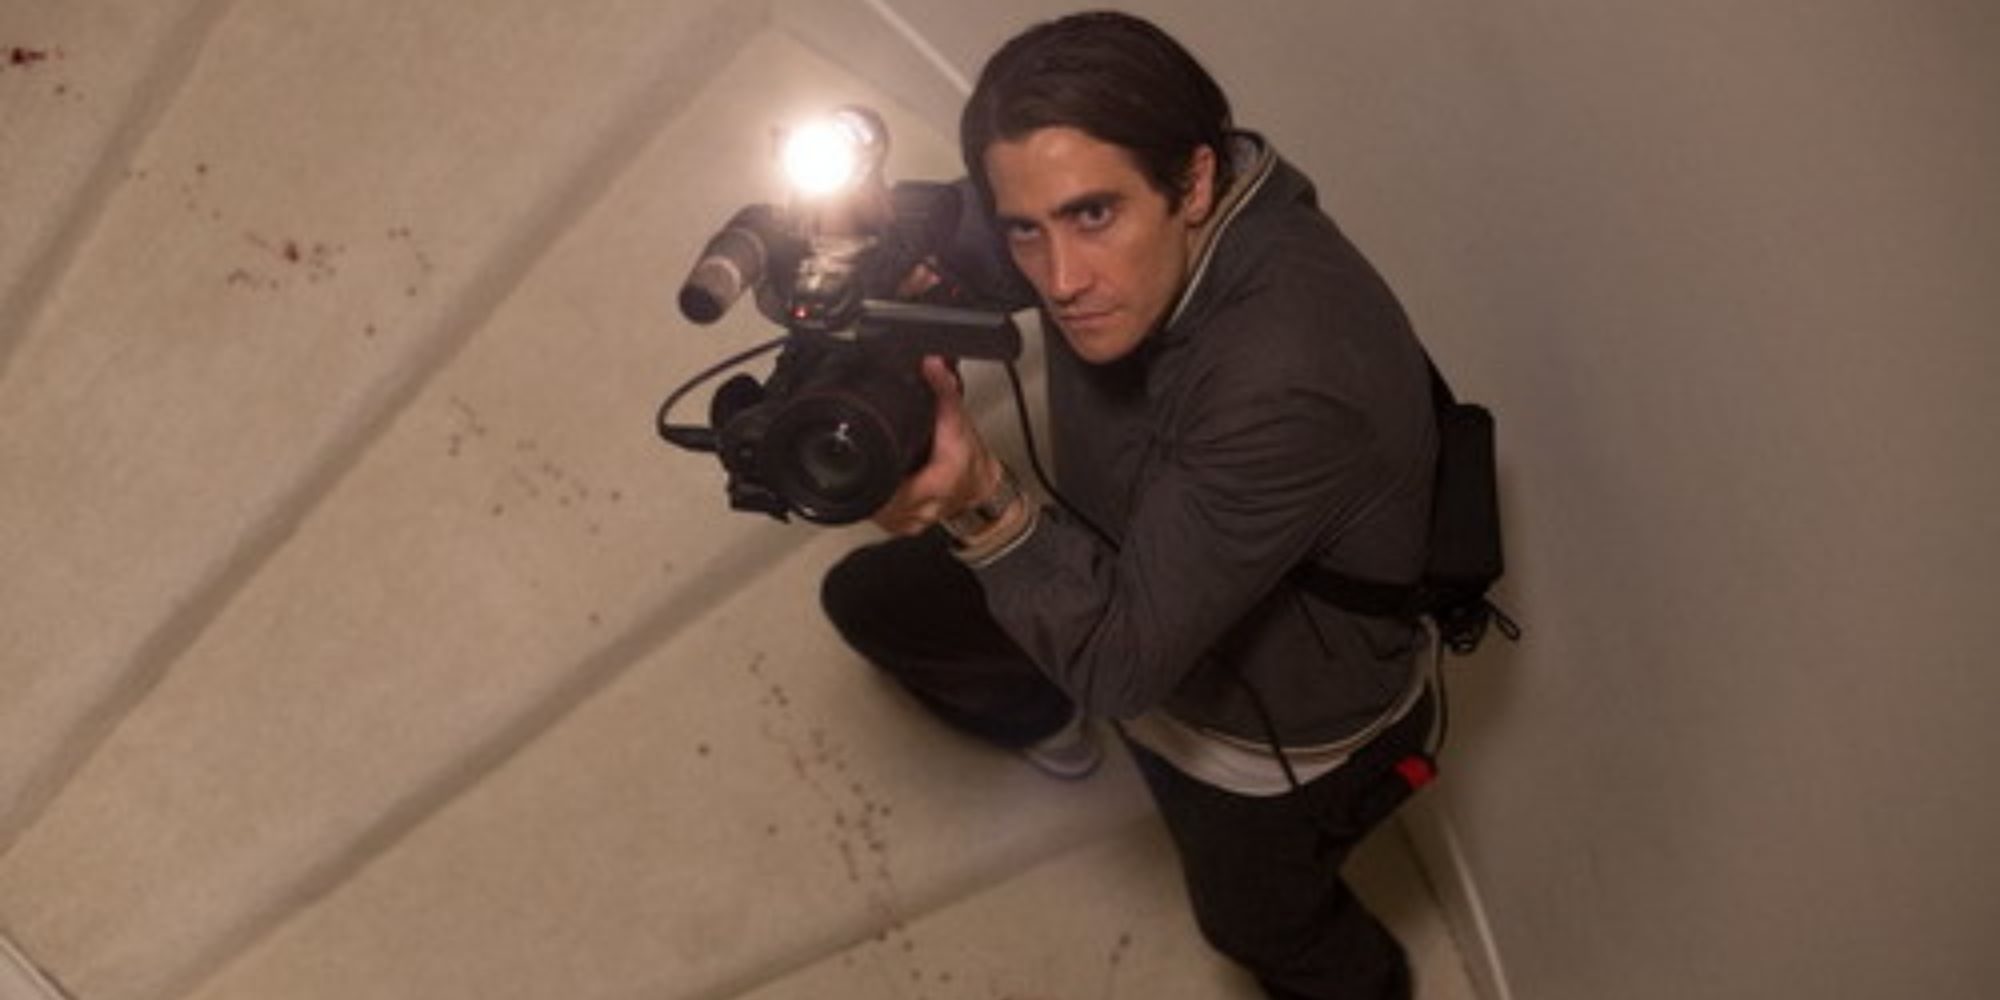 Jake Gyllenhaal as Lou Bloom walking up the stairs holding a camera in 'Nightcrawler'